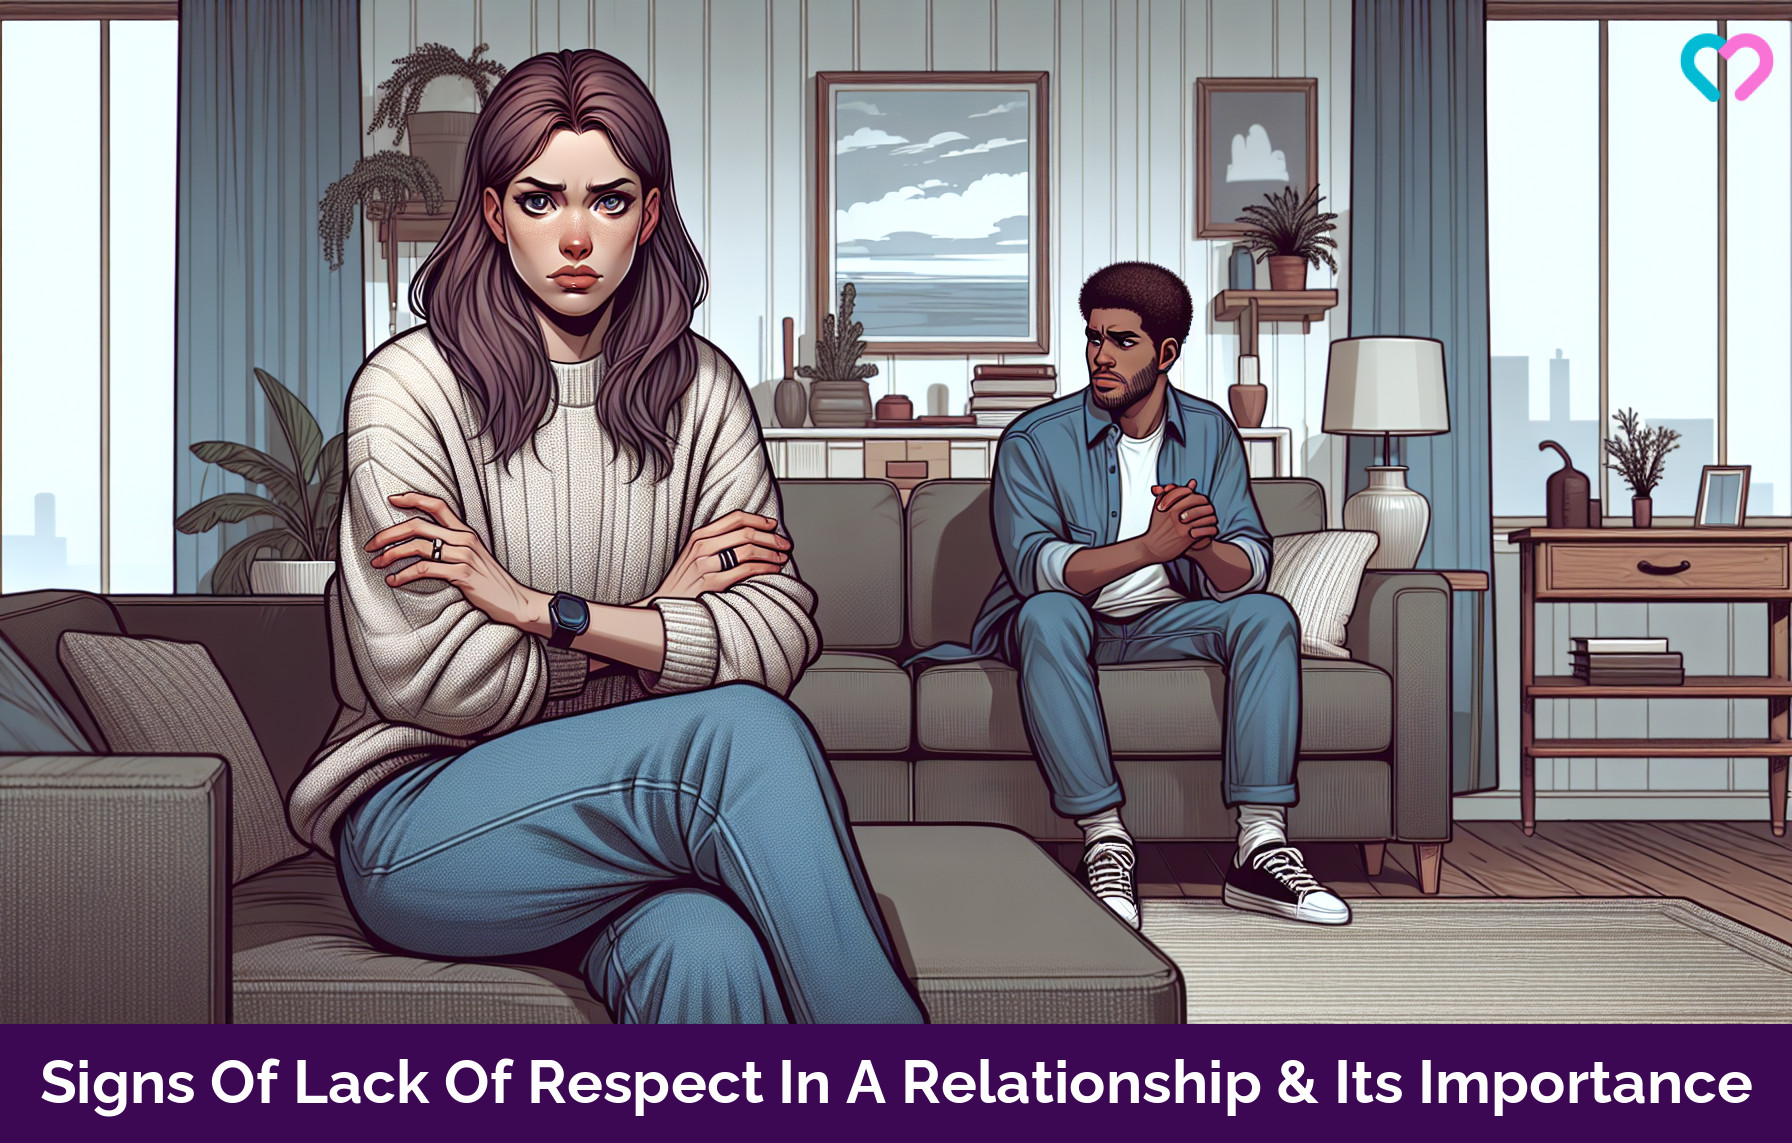 Respect in a relationship_illustration